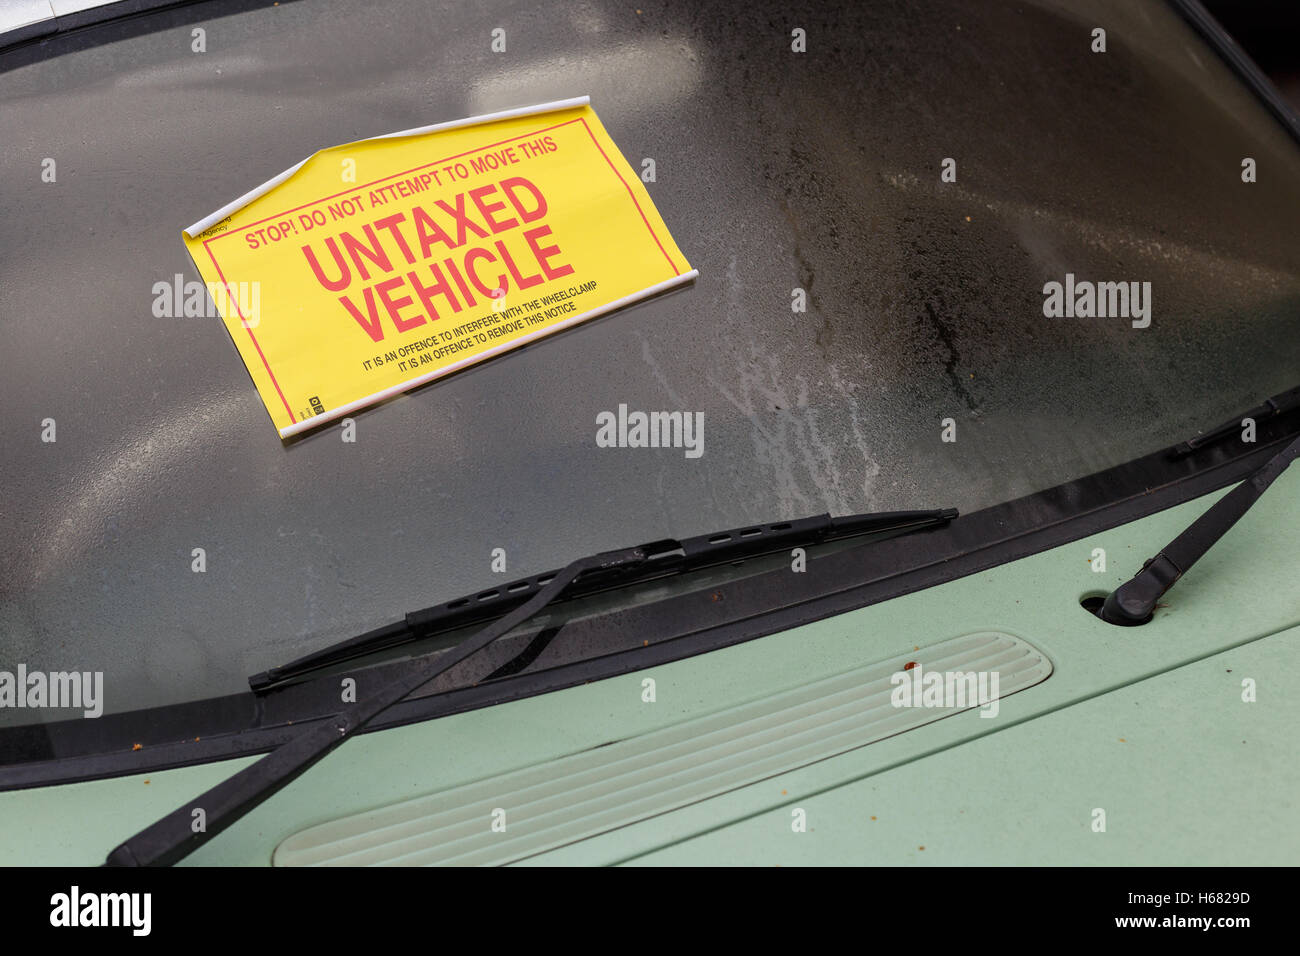 A Nissan Figaro car with 'Untaxed Vehicle' sticker attached to windshield. Stock Photo